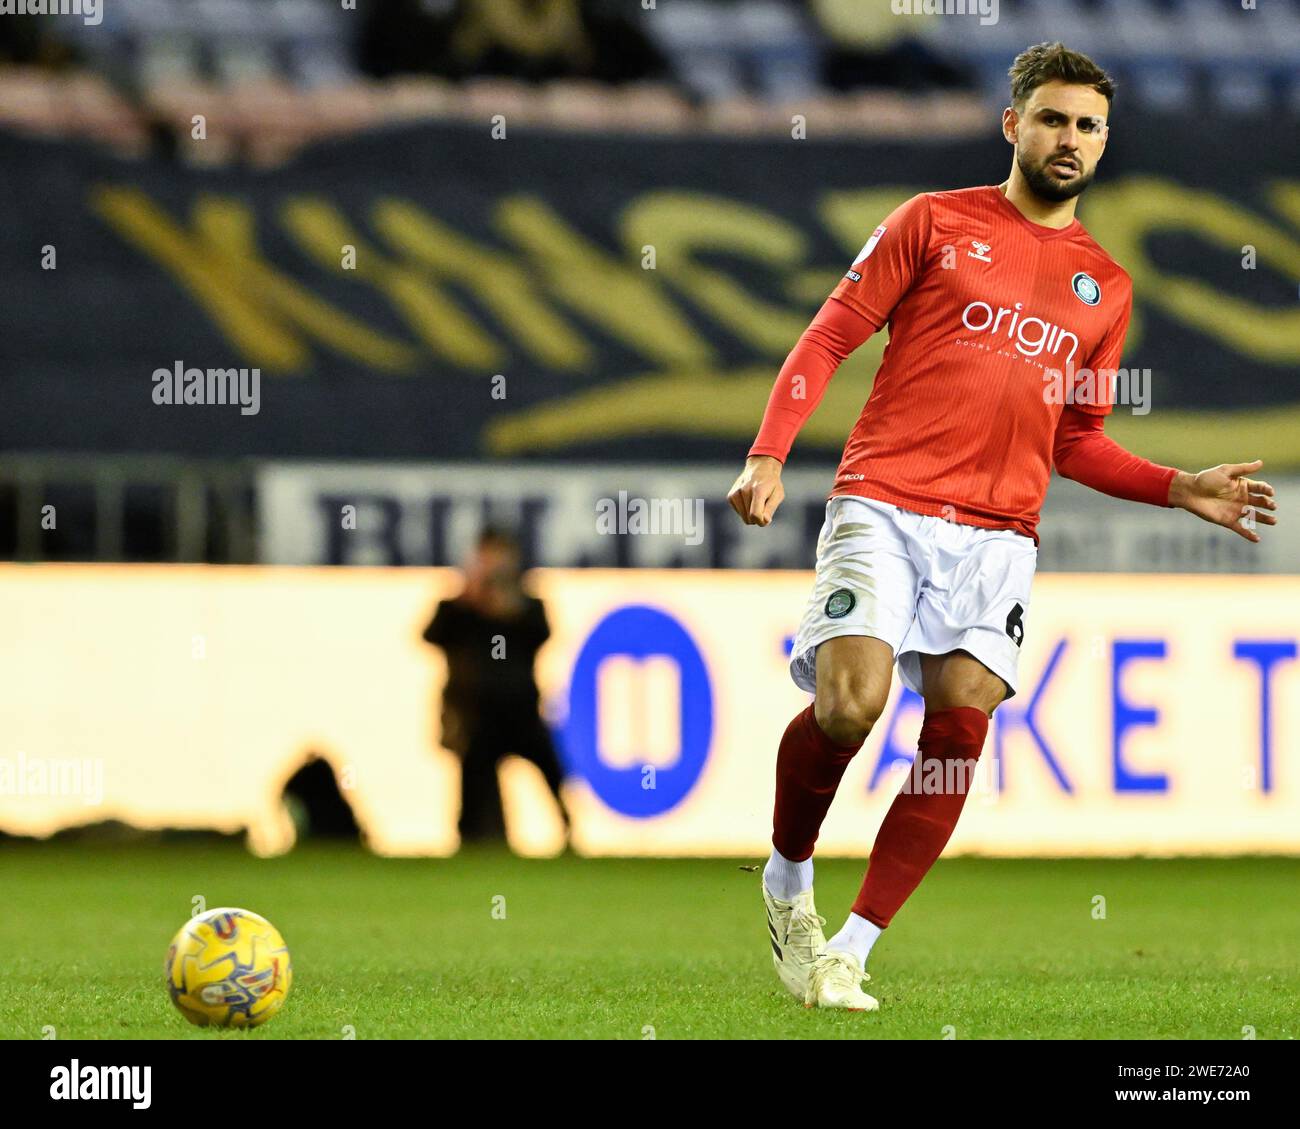 Ryan Tafazolli of Wycombe Wanderers passes the ball, during the Sky Bet League 1 match Wigan Athletic vs Wycombe Wanderers at DW Stadium, Wigan, United Kingdom, 23rd January 2024  (Photo by Cody Froggatt/News Images) Stock Photo